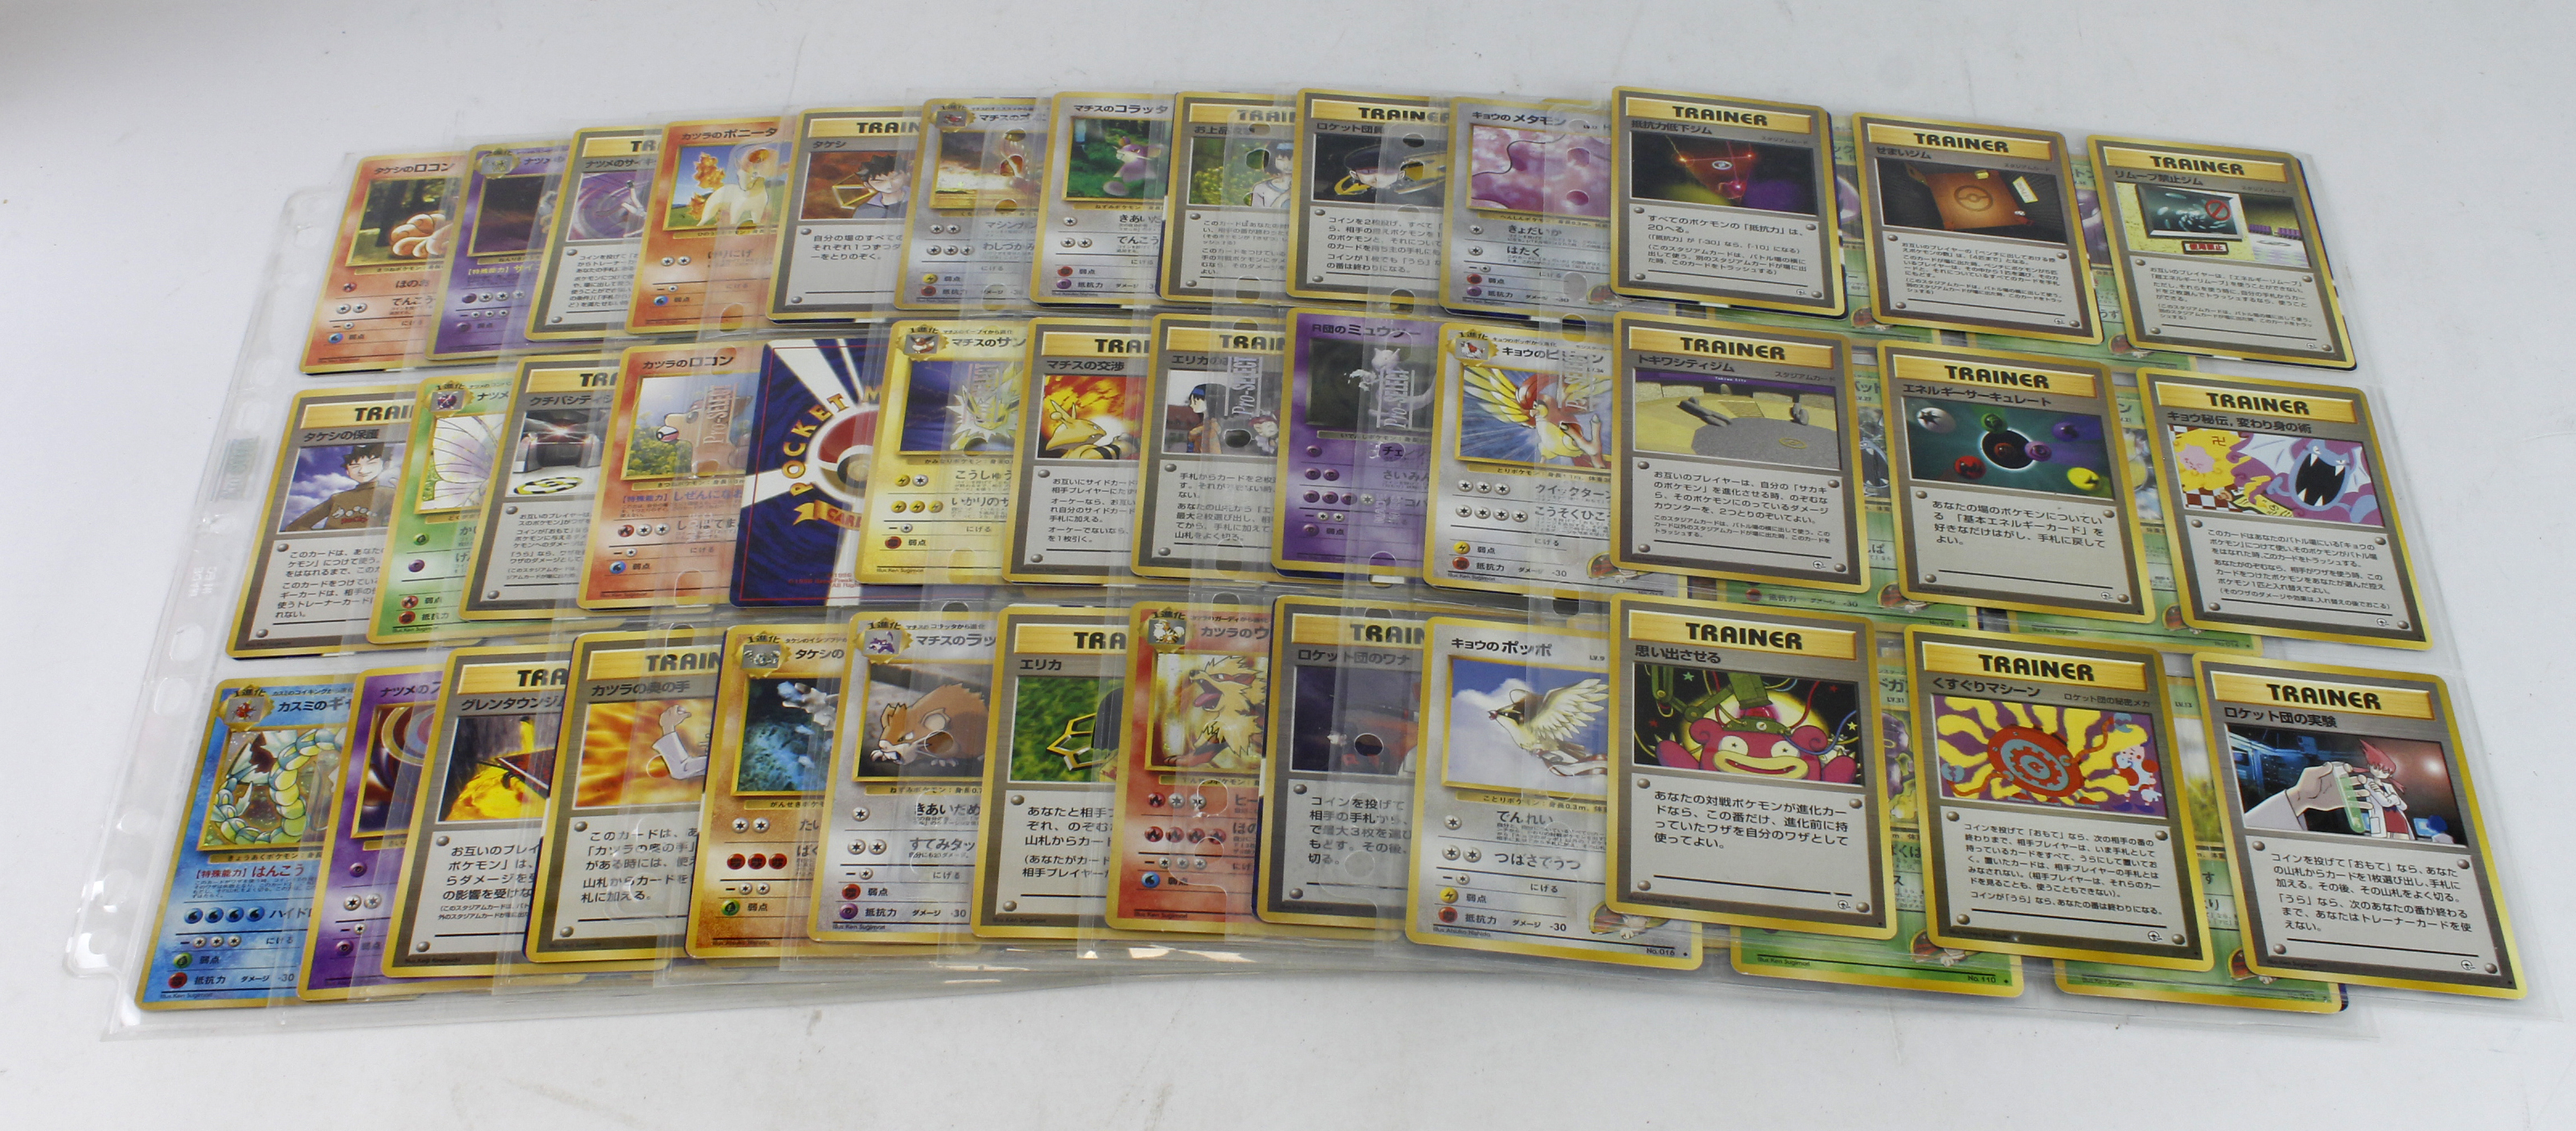 Pokemon. A collection of approximately 180 mixed Japanese Pokemon Gym 1 & 2 cards (incl. Blaines